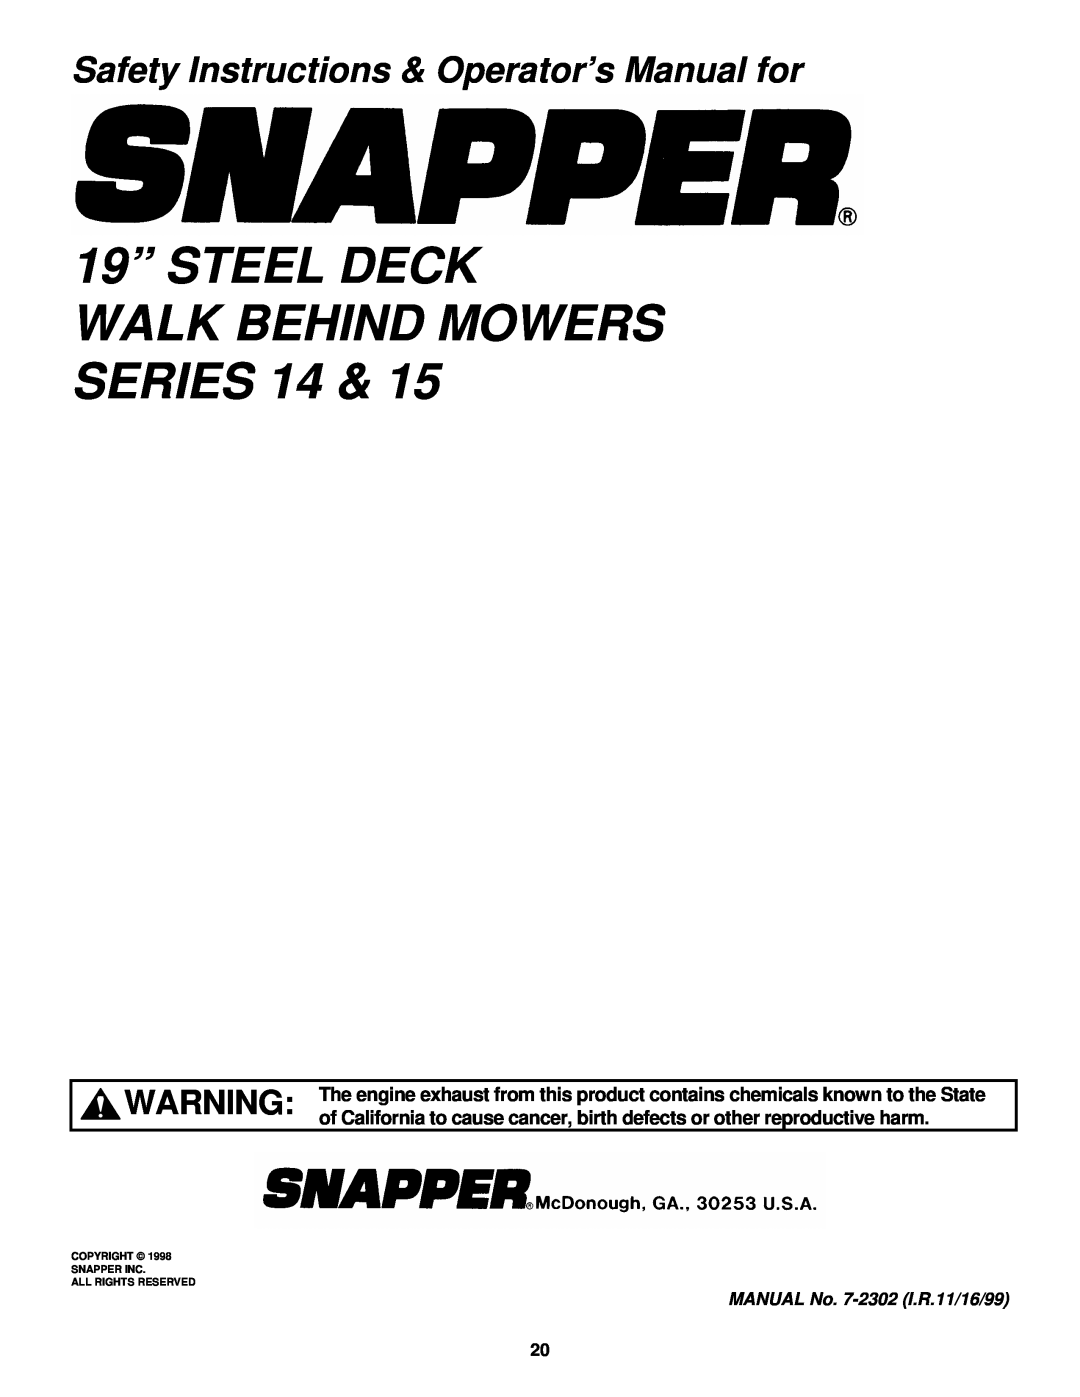 Snapper R194014 19” STEEL DECK WALK BEHIND MOWERS SERIES, Safety Instructions & Operator’s Manual for 